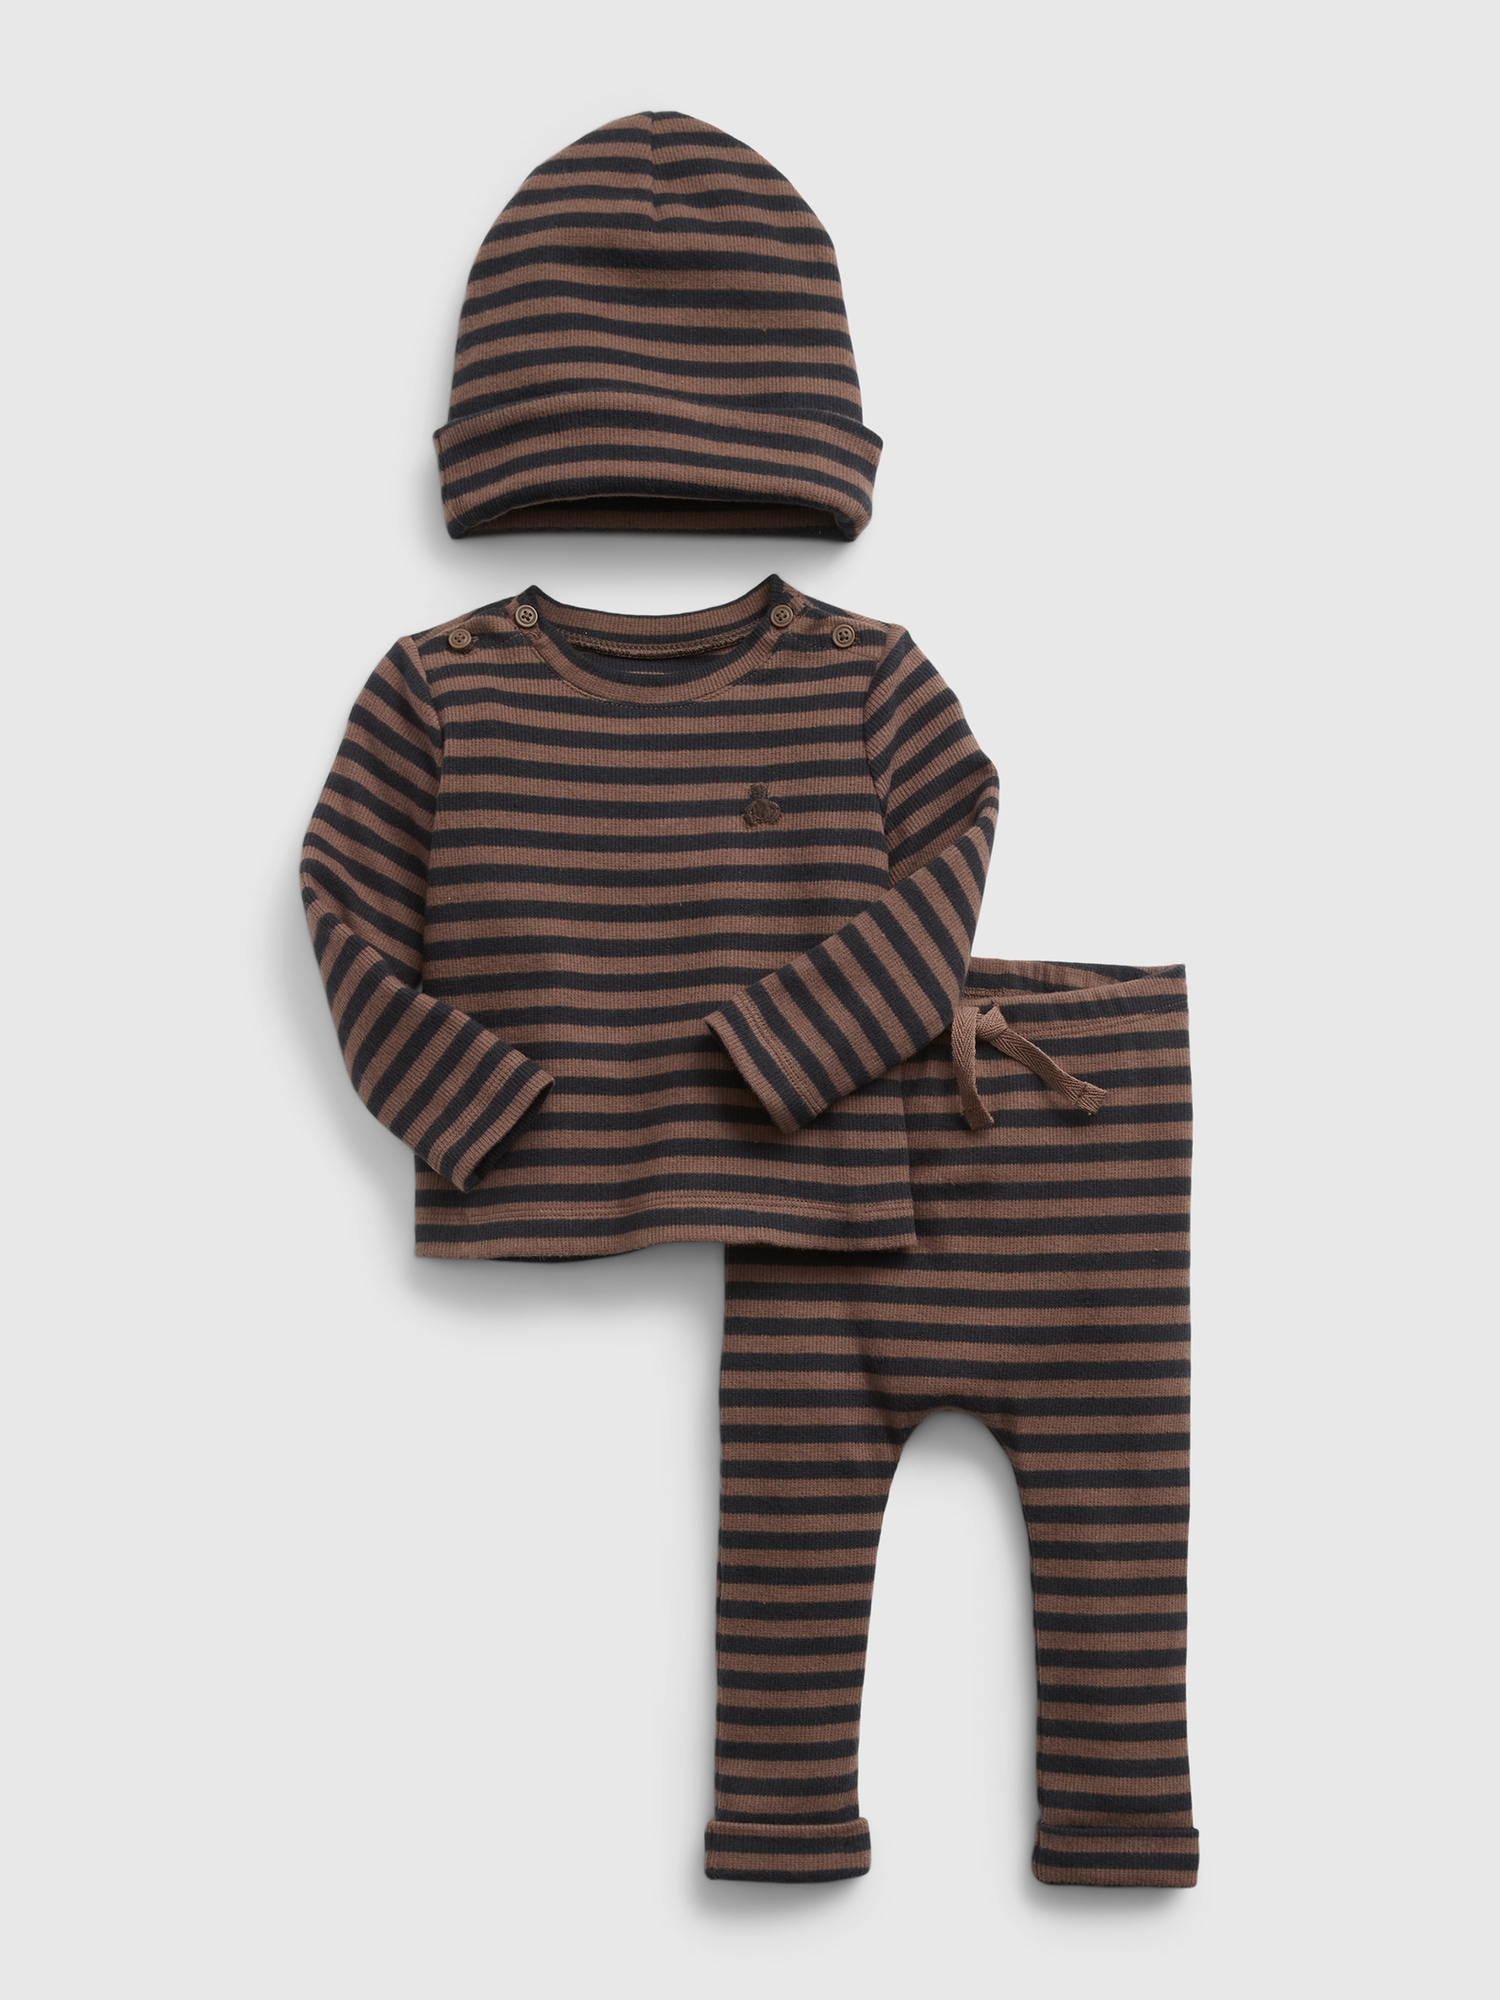 Gap Baby Rib 3-Piece Outfit Set brown. 1